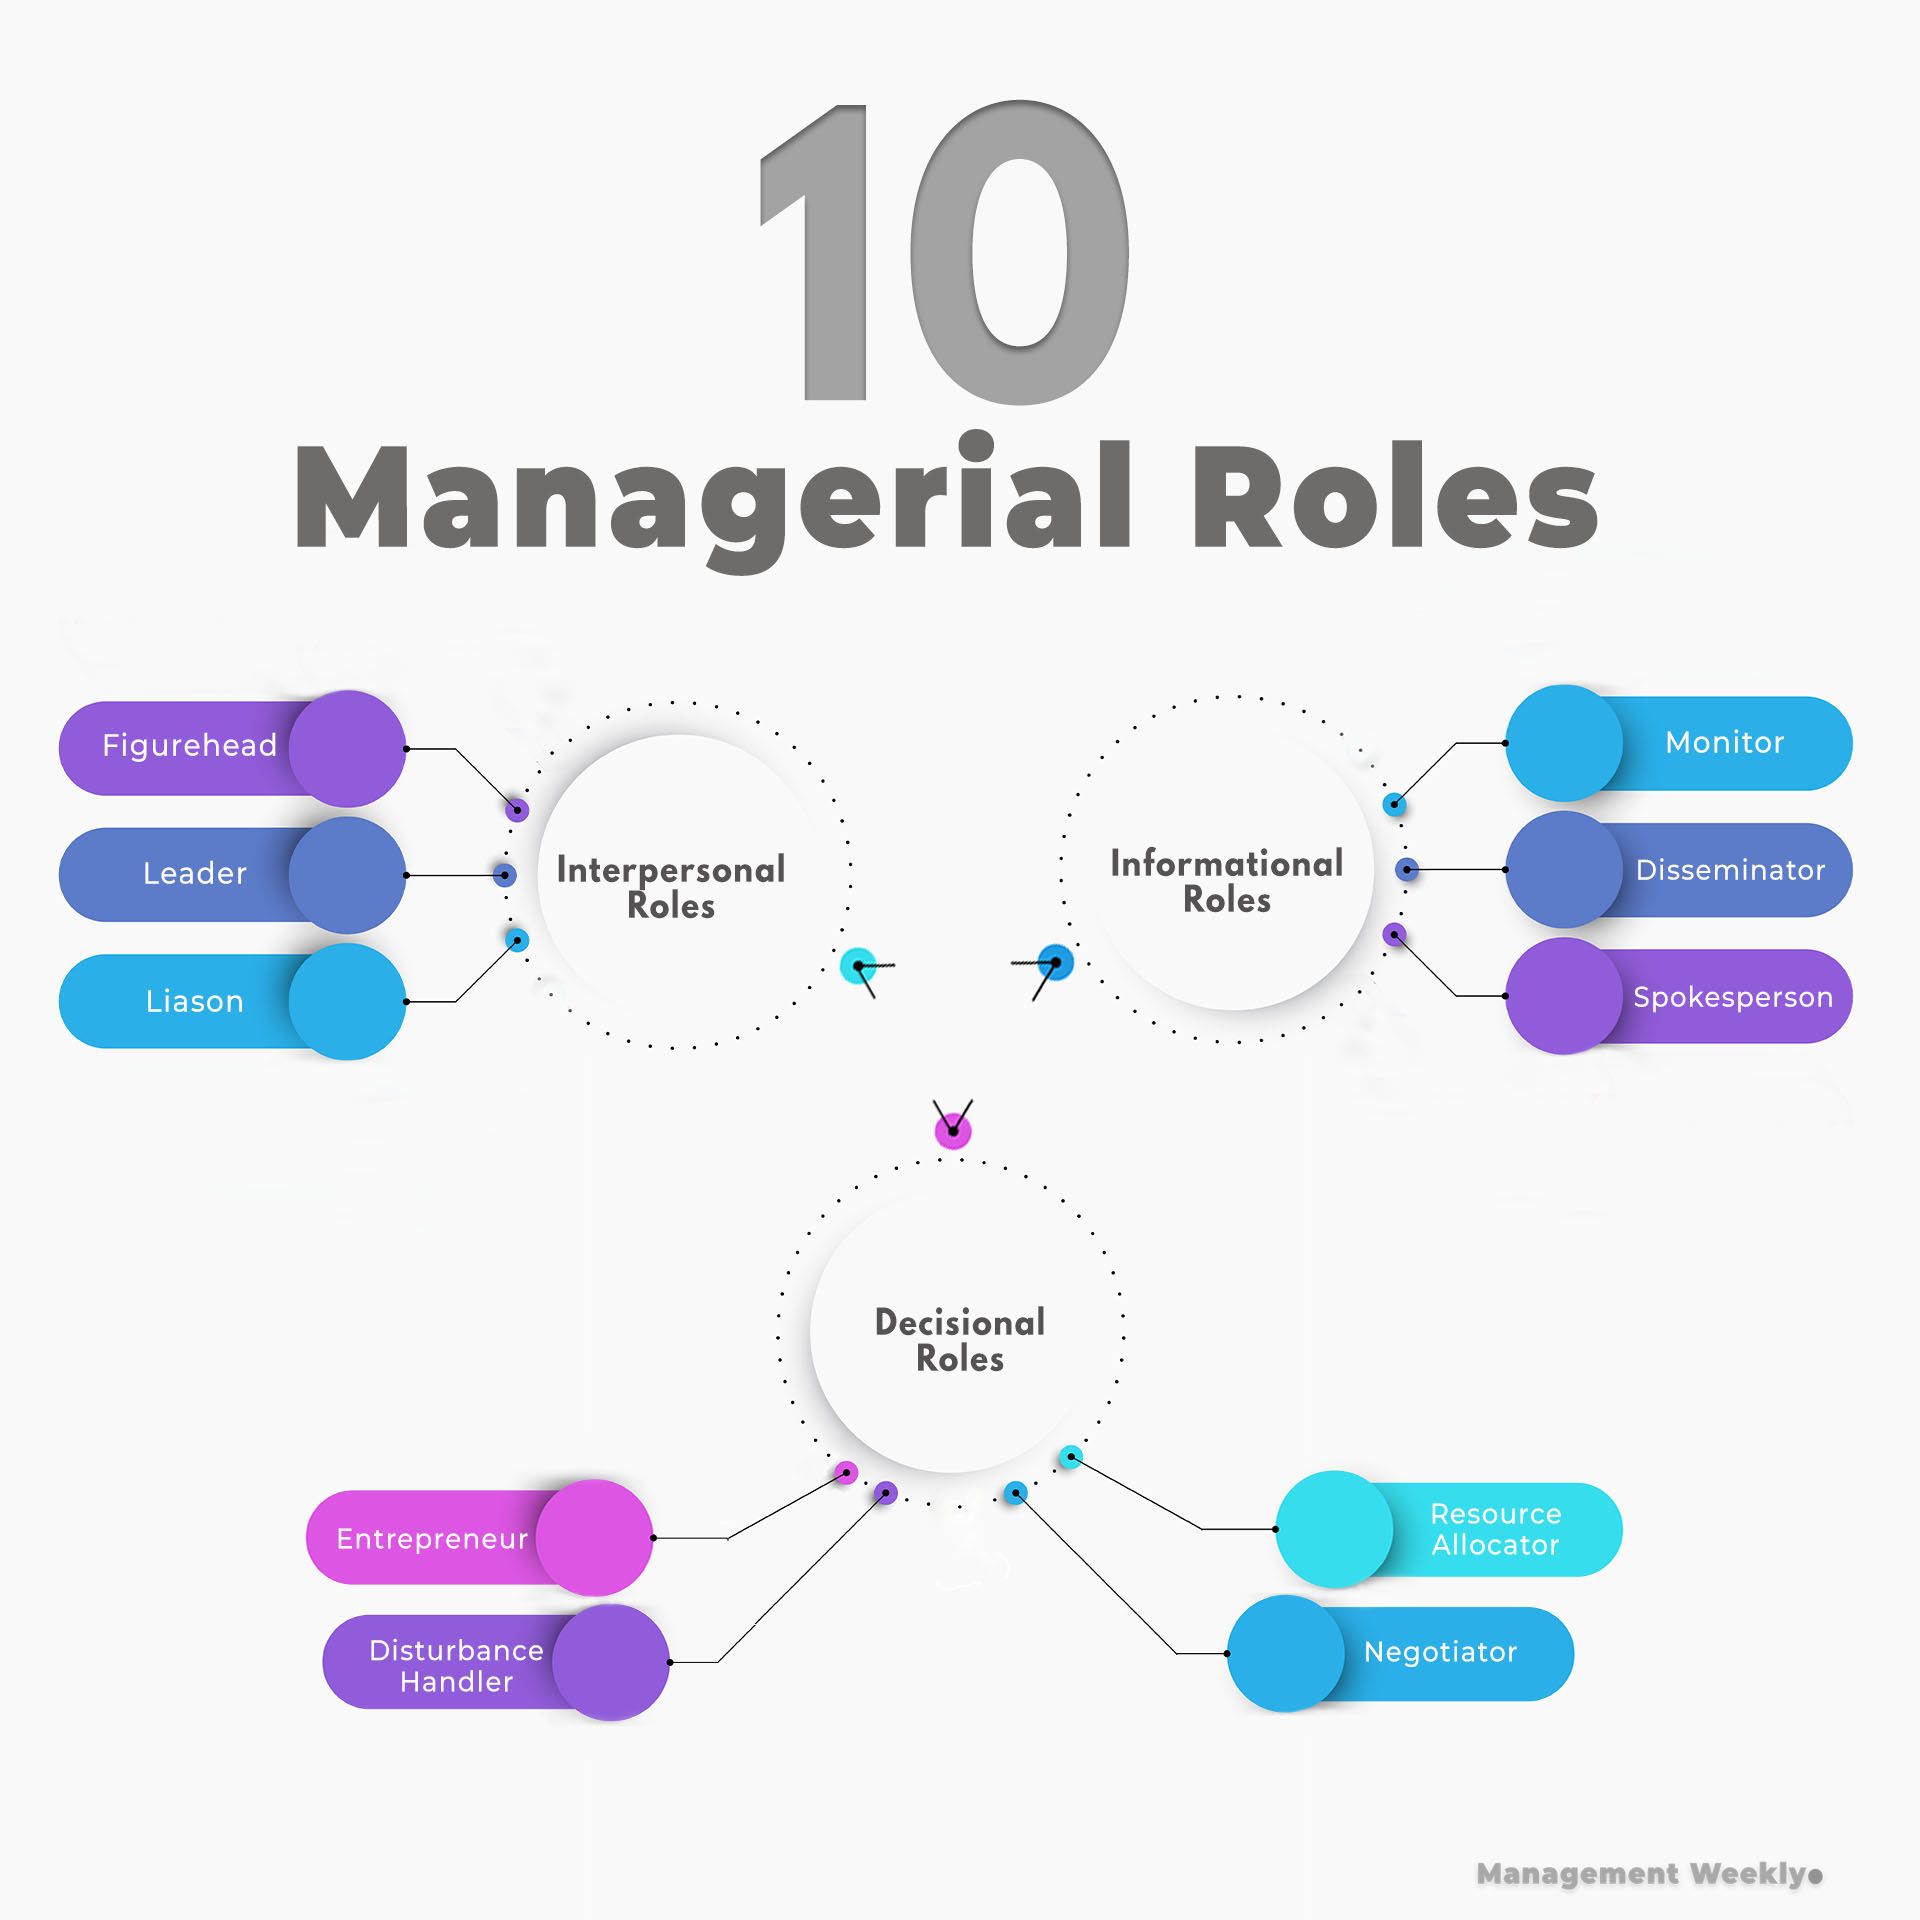 S manager. Henry Mintzberg Managerial roles. Roles of Manager. Mintzberg’s Managerial roles: informational. Игра role of roles.